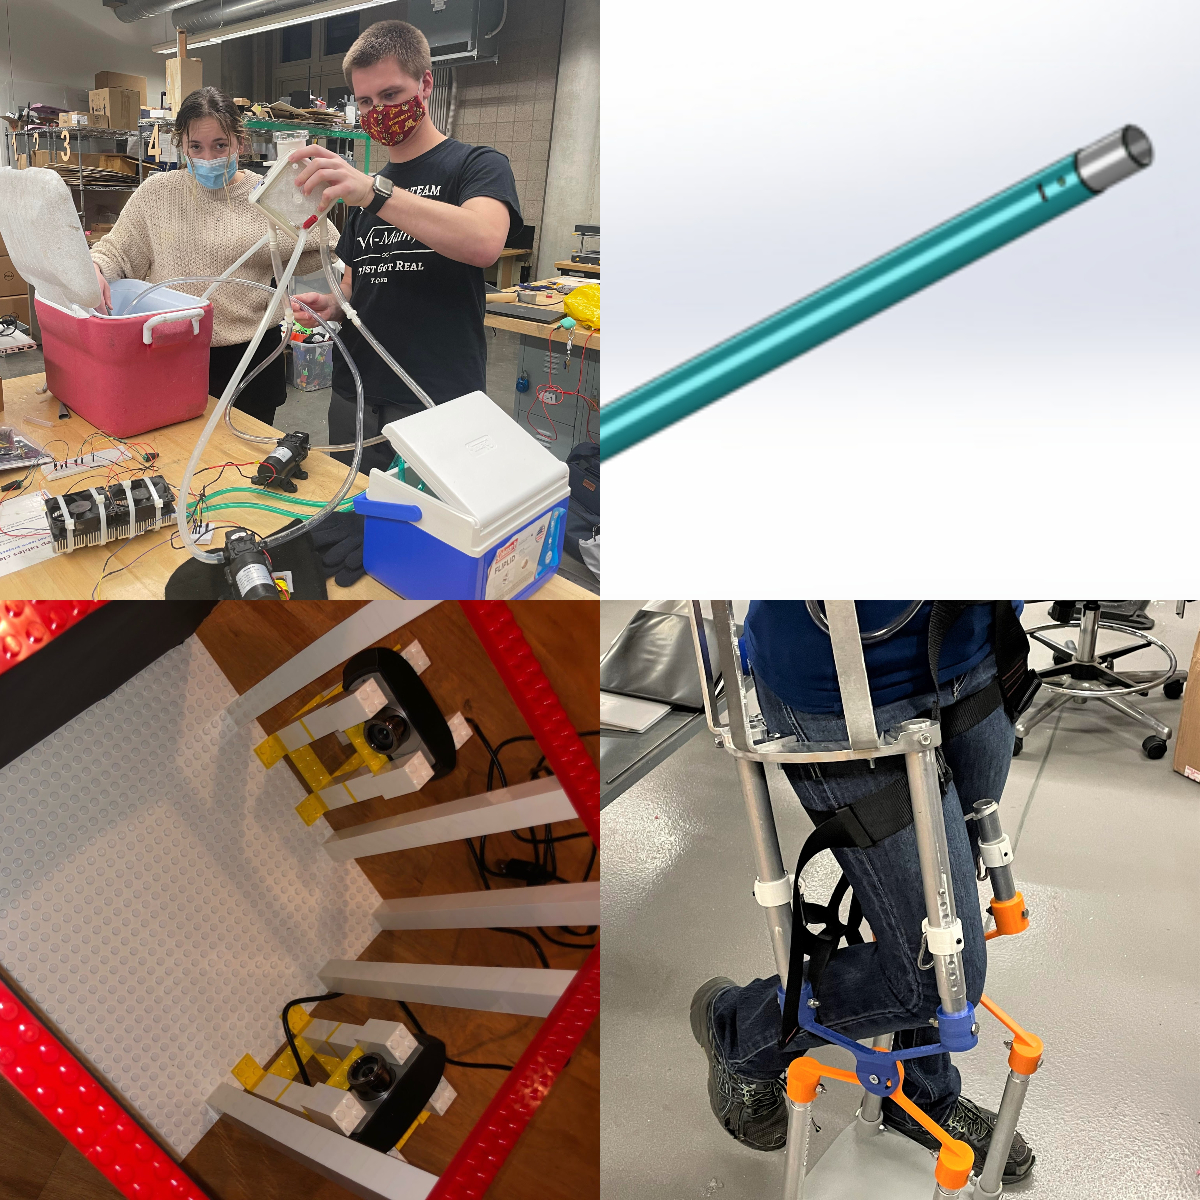 Collage of BME research innovations: STudents working in lab, a CAD drawing of a cylindrical medical device, LEGO prototype of a simulator, and an assistive device attached to someone's leg.